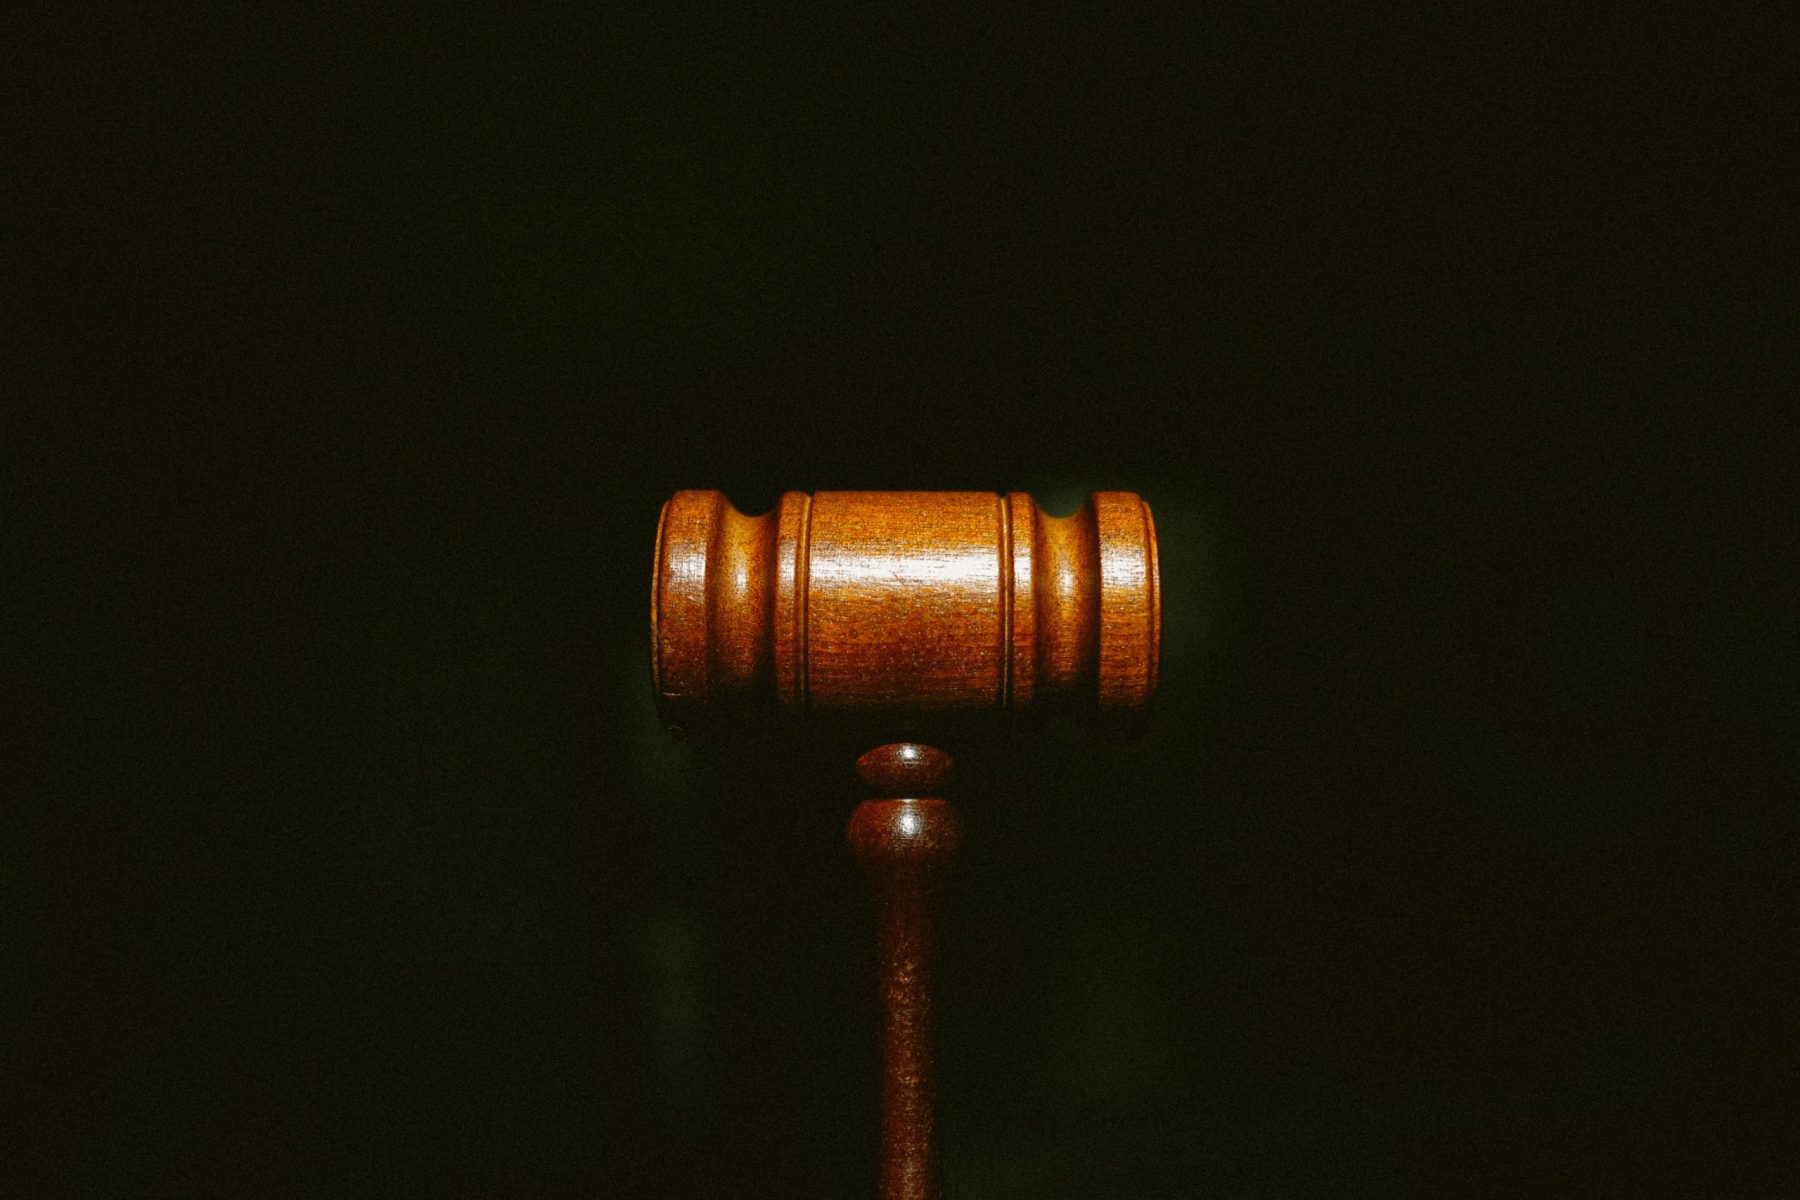 in an article about the depp v. heard case, a photo of a gavel against a black background